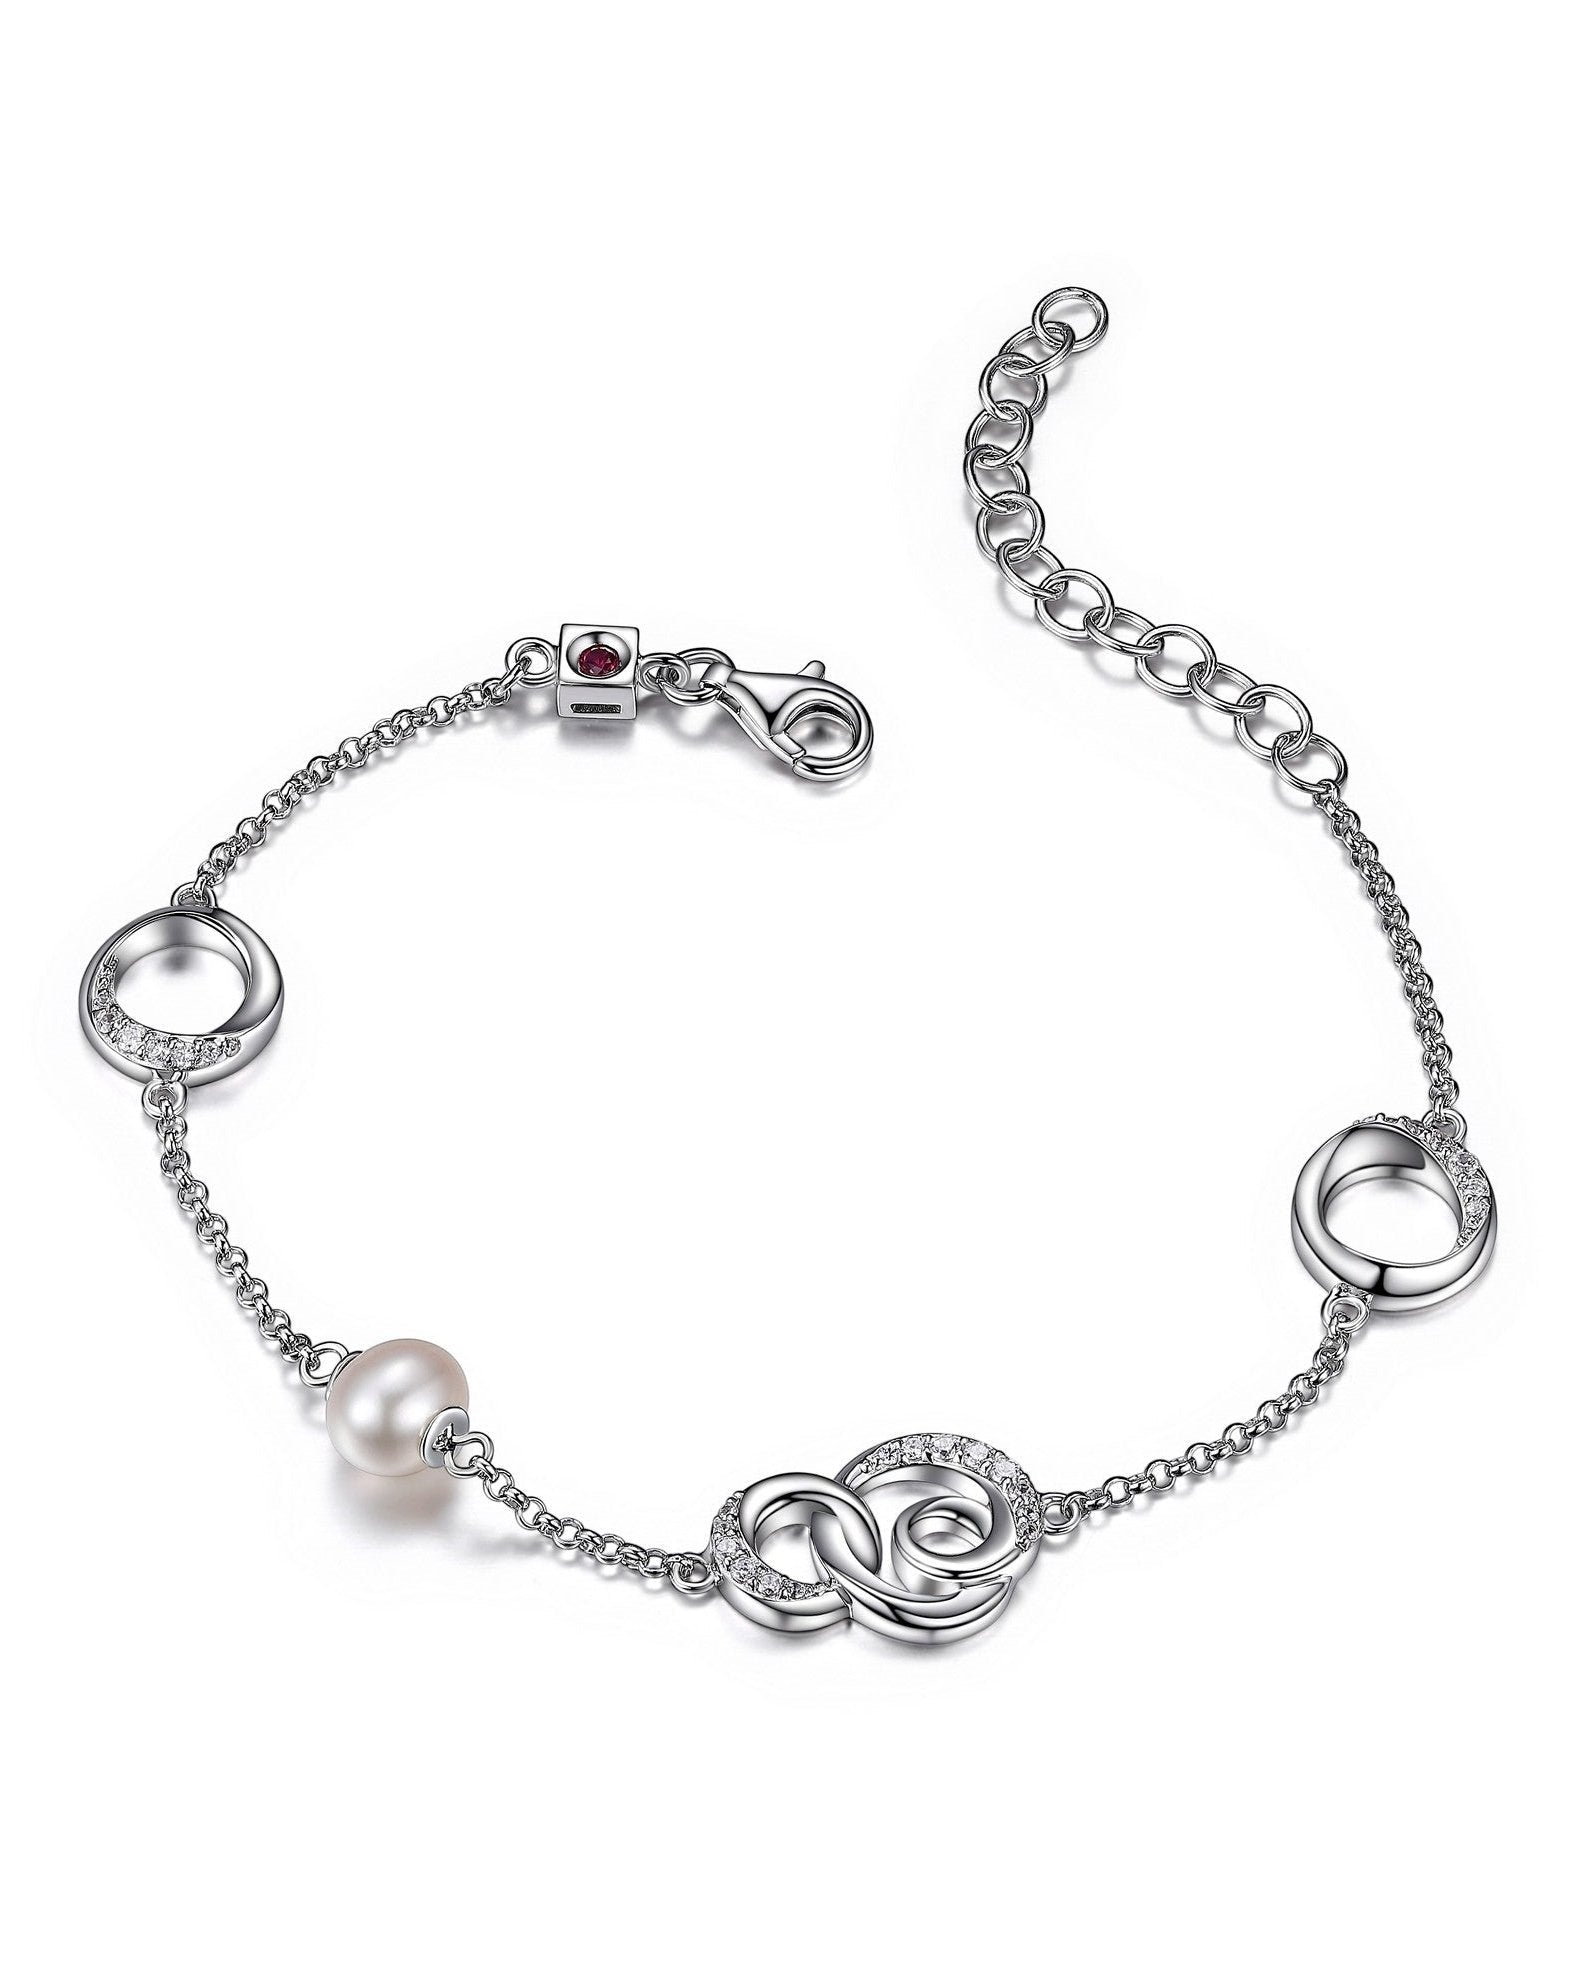 SSRP Infinity Genuine White Pearl Station Bracelet 6.5" with 1.5" extender. Stone size: 6-6.5(mm)